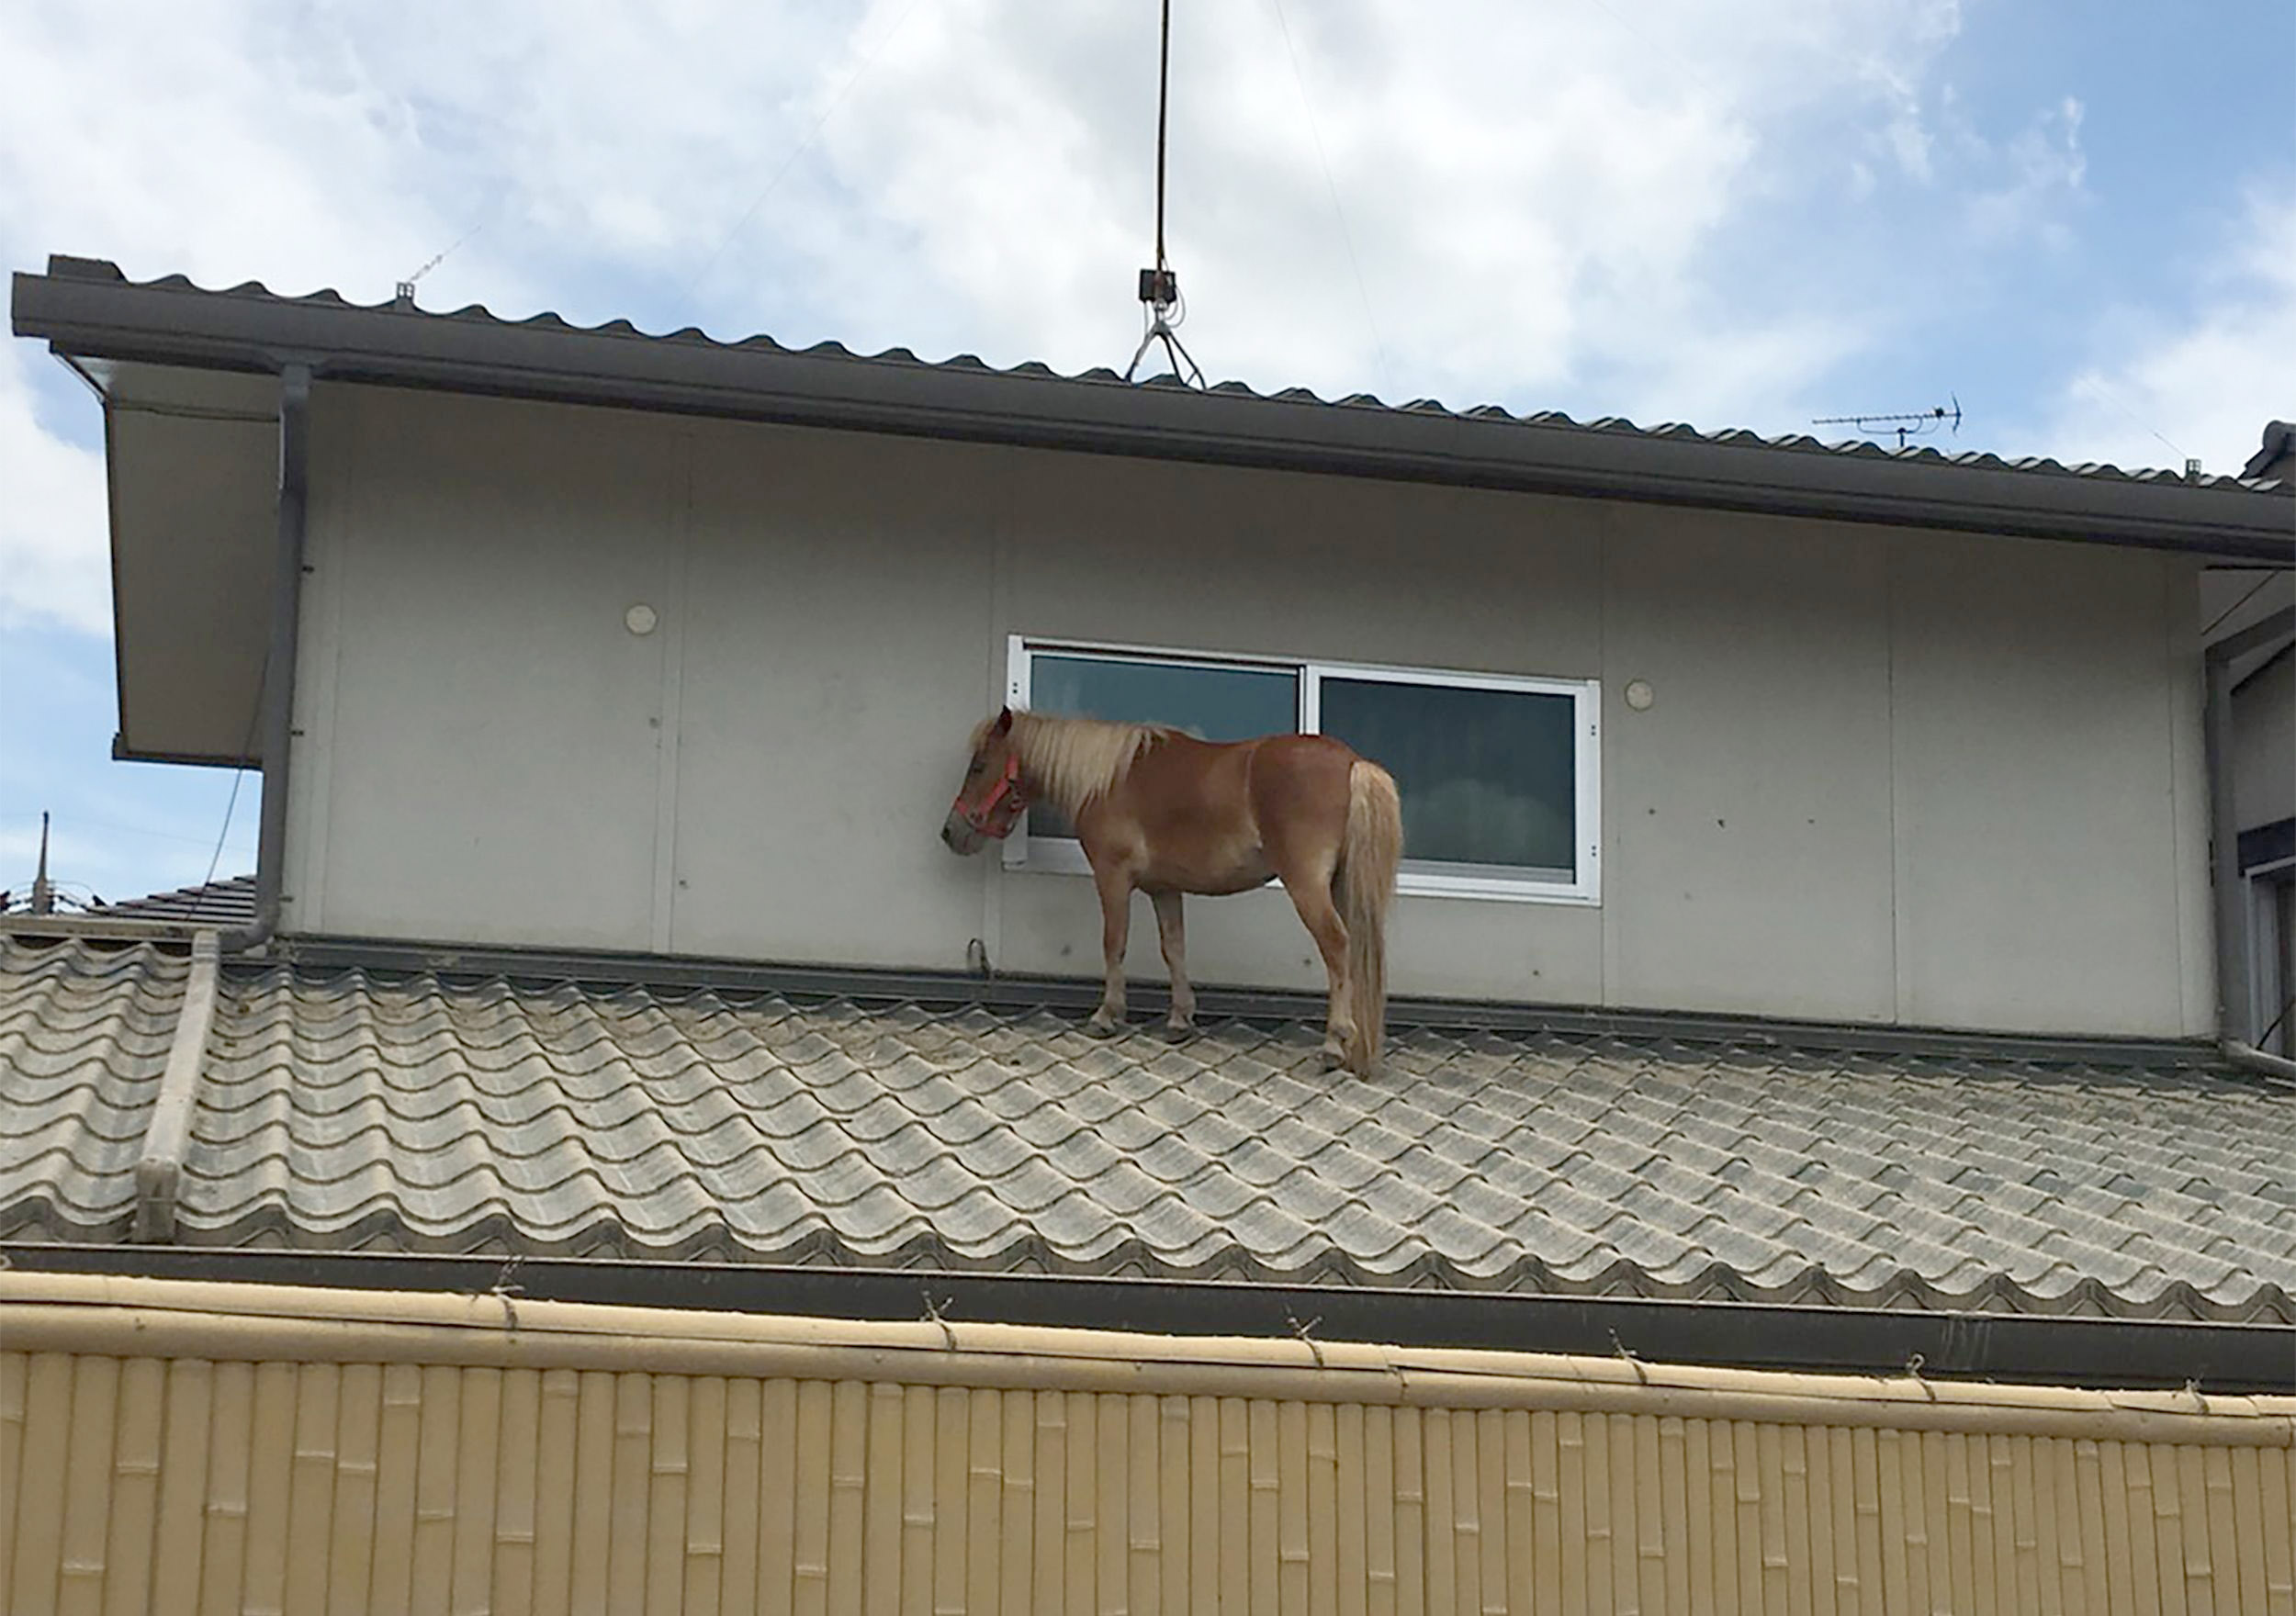 PHOTO: This handout picture taken on July 9, 2018 by the NGO Peace Winds Japan shows a miniature horse stranded on a rooftop due to the recent flooding in the Mabicho area in Kurashiki, Okayama prefecture, Japan.